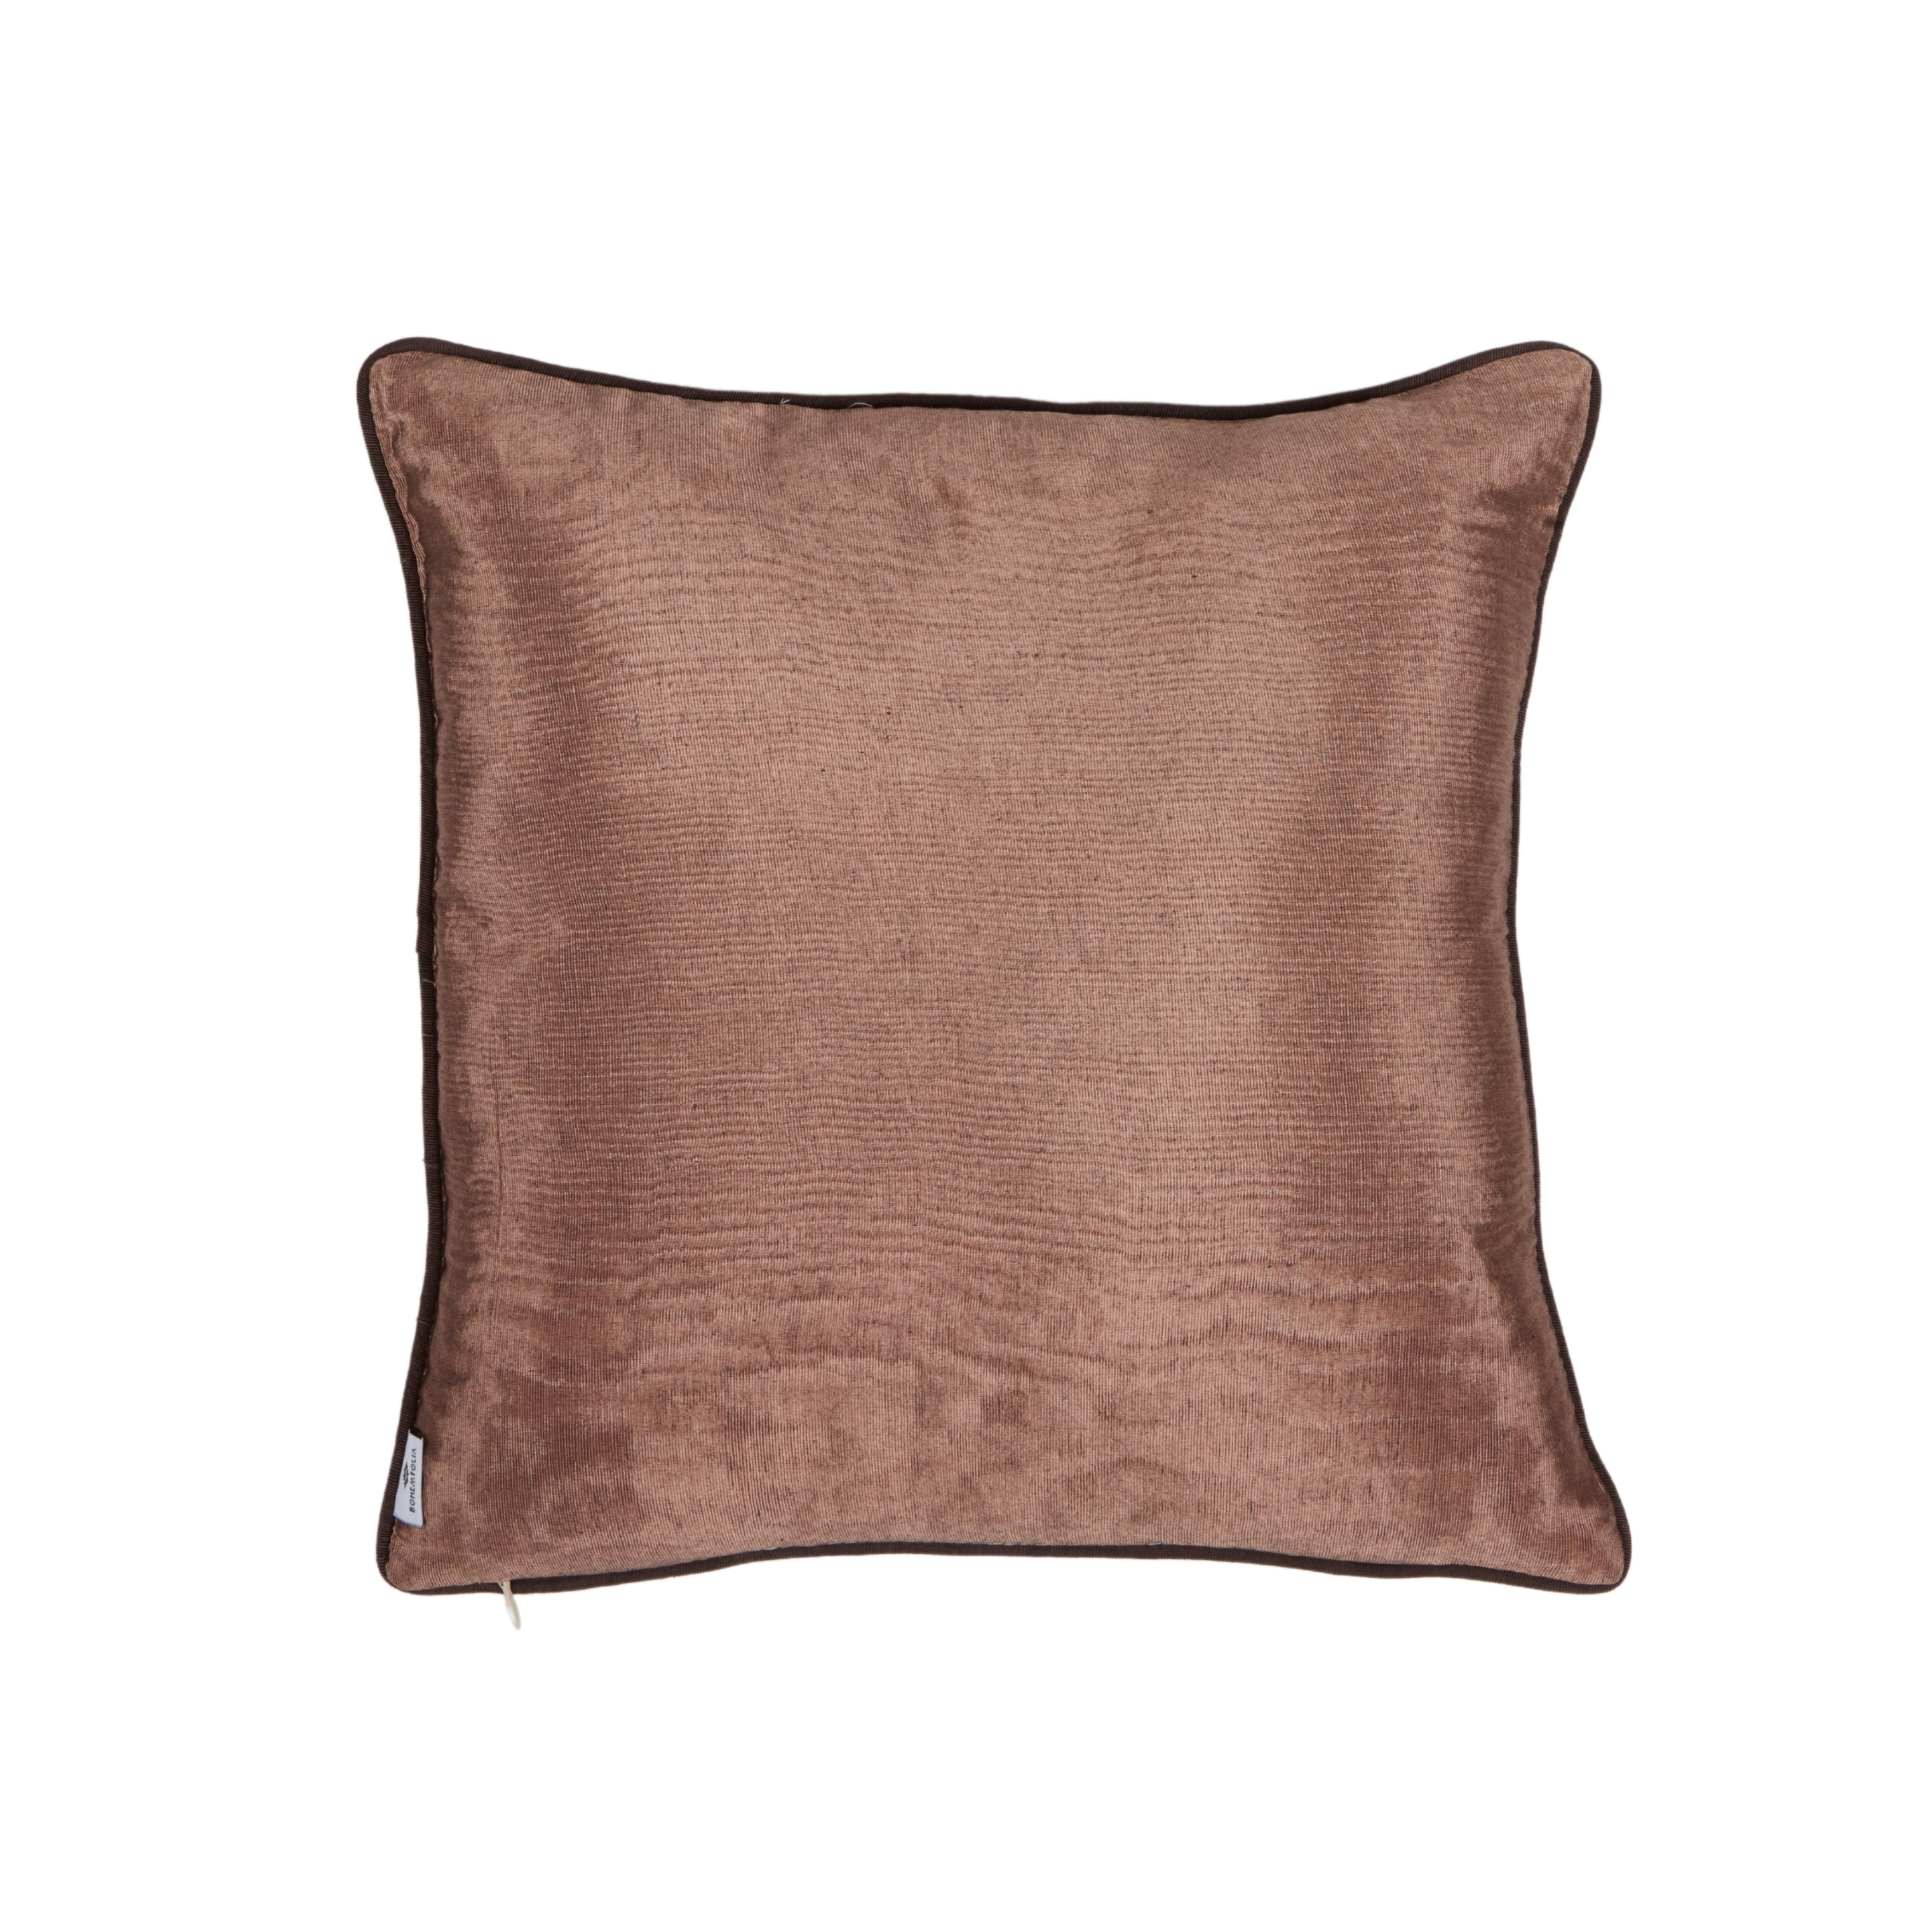 Kutnu Silk Pillow with Embroidery - HandsOnHips , Light Brown Authentic Silk Cushion (Copy)